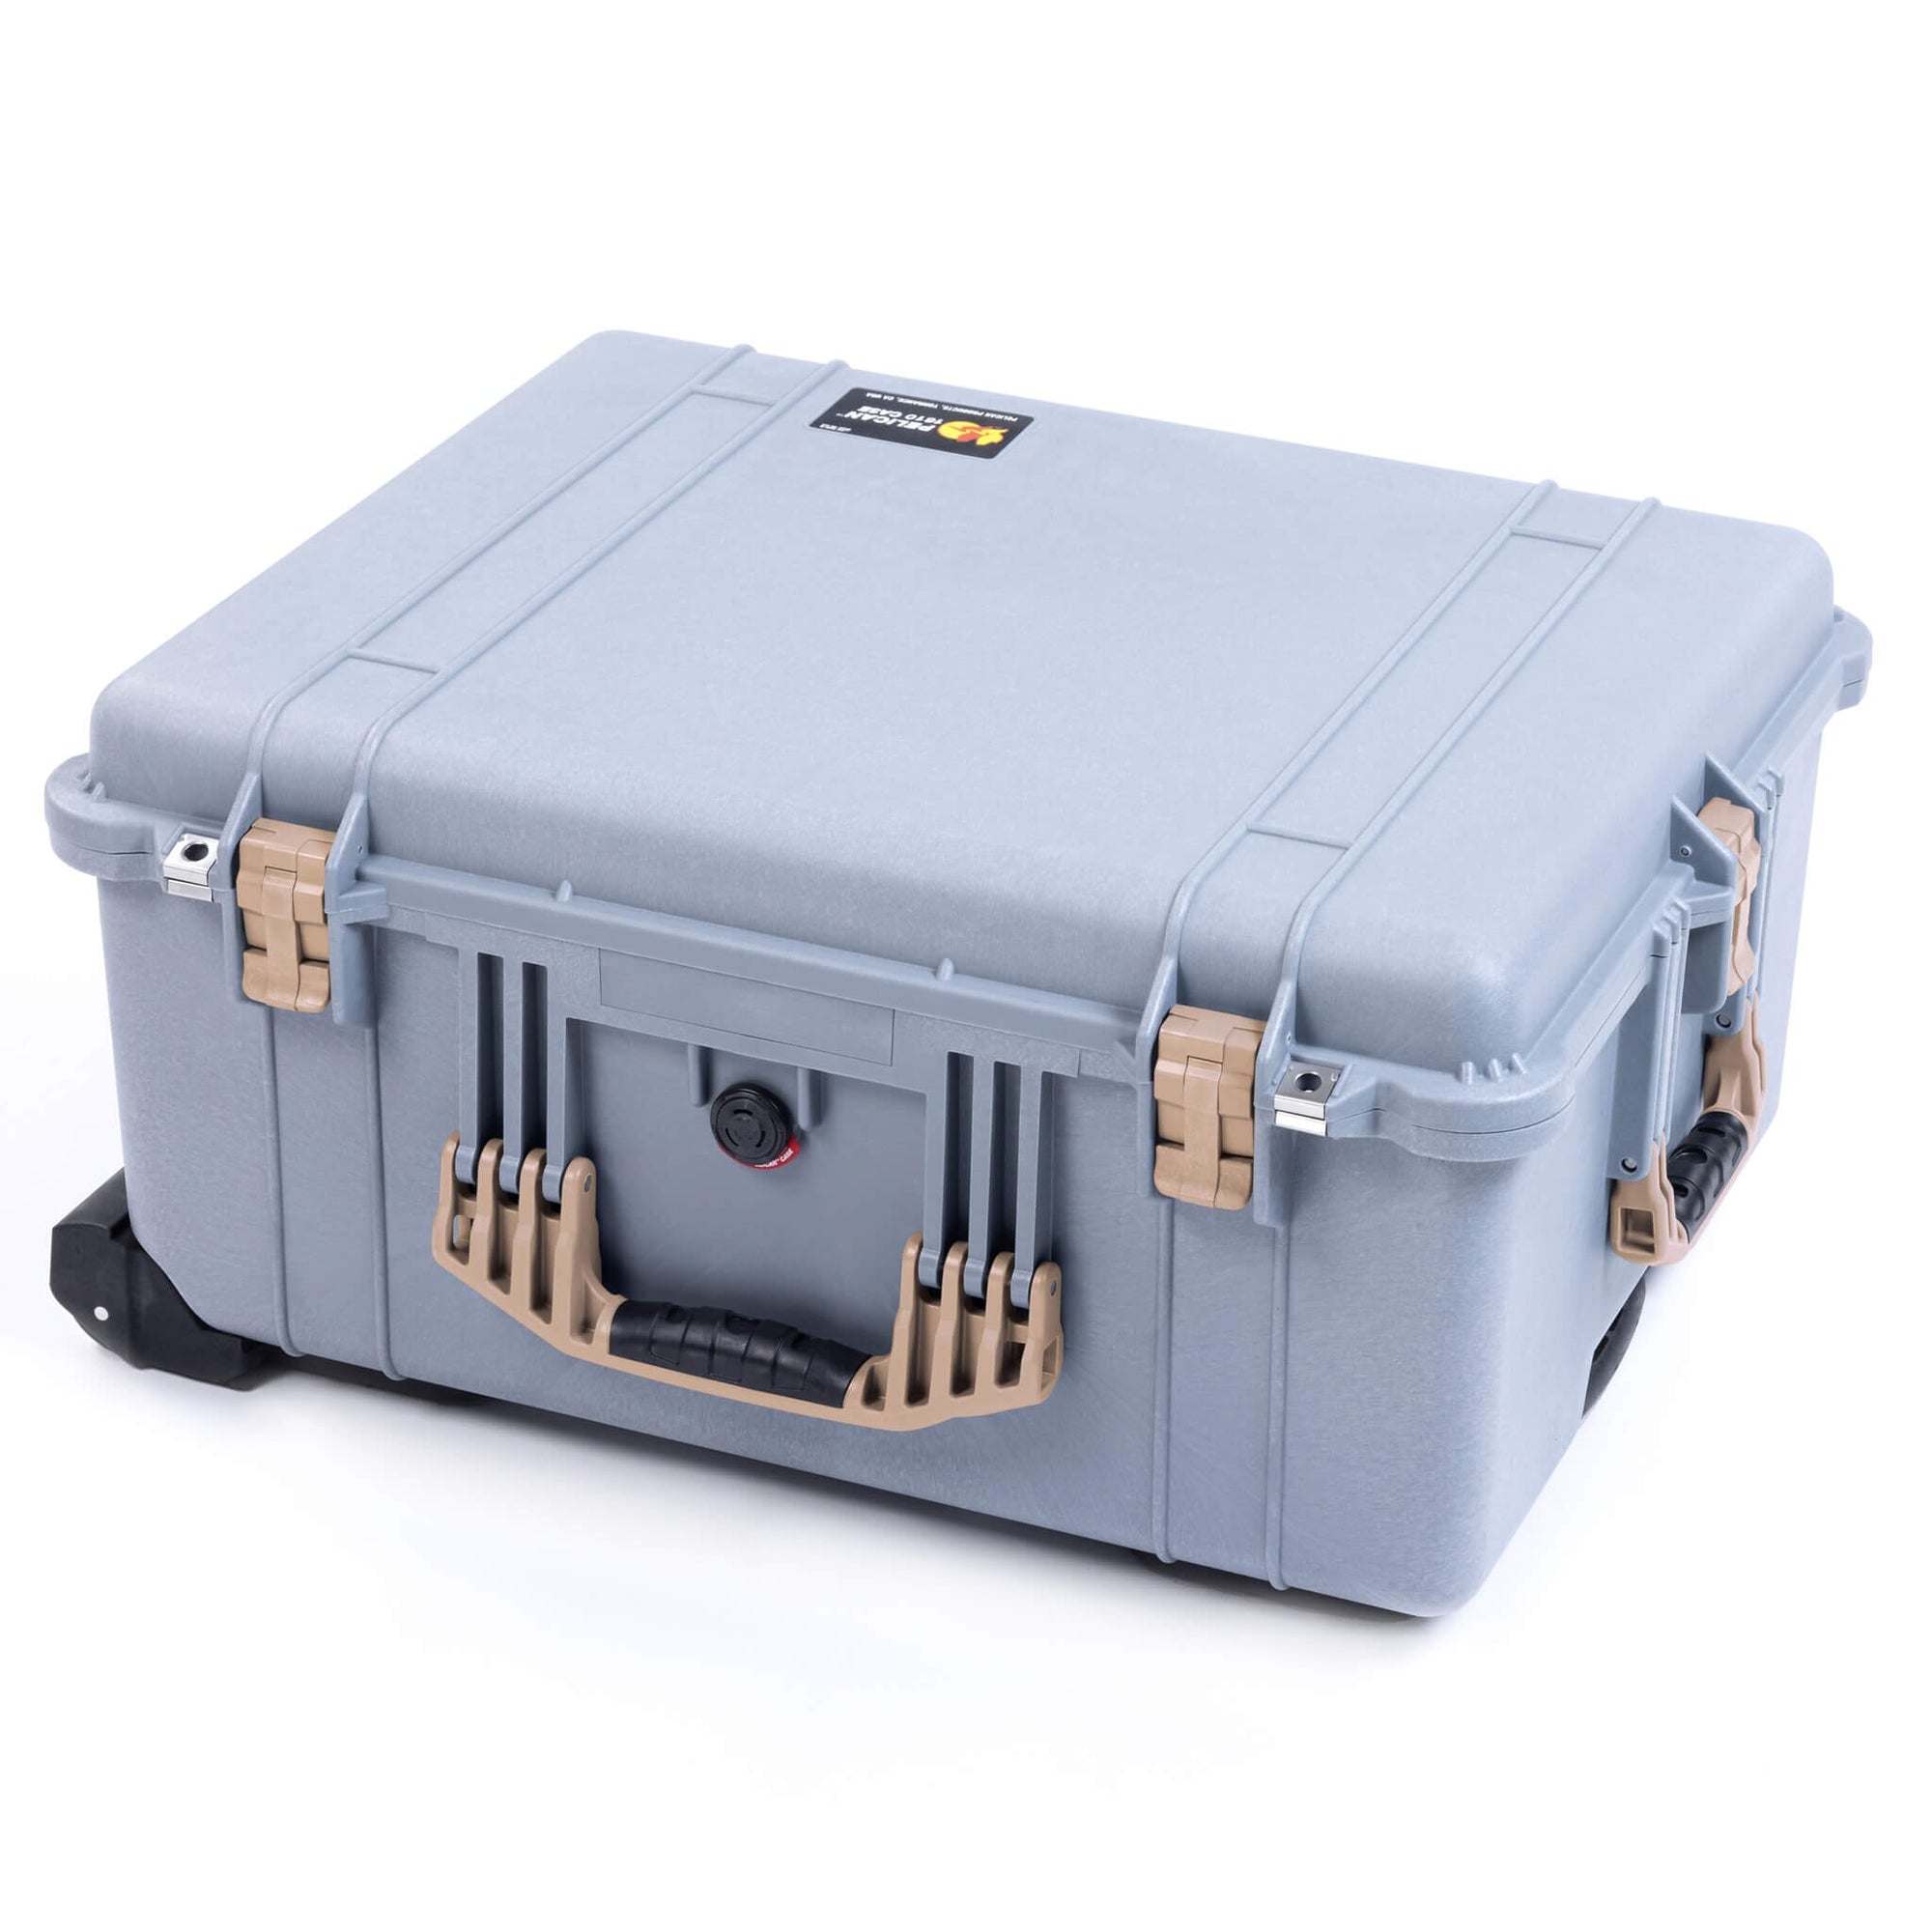 Pelican 1610 Case, Silver with Desert Tan Handles and Latches ColorCase 